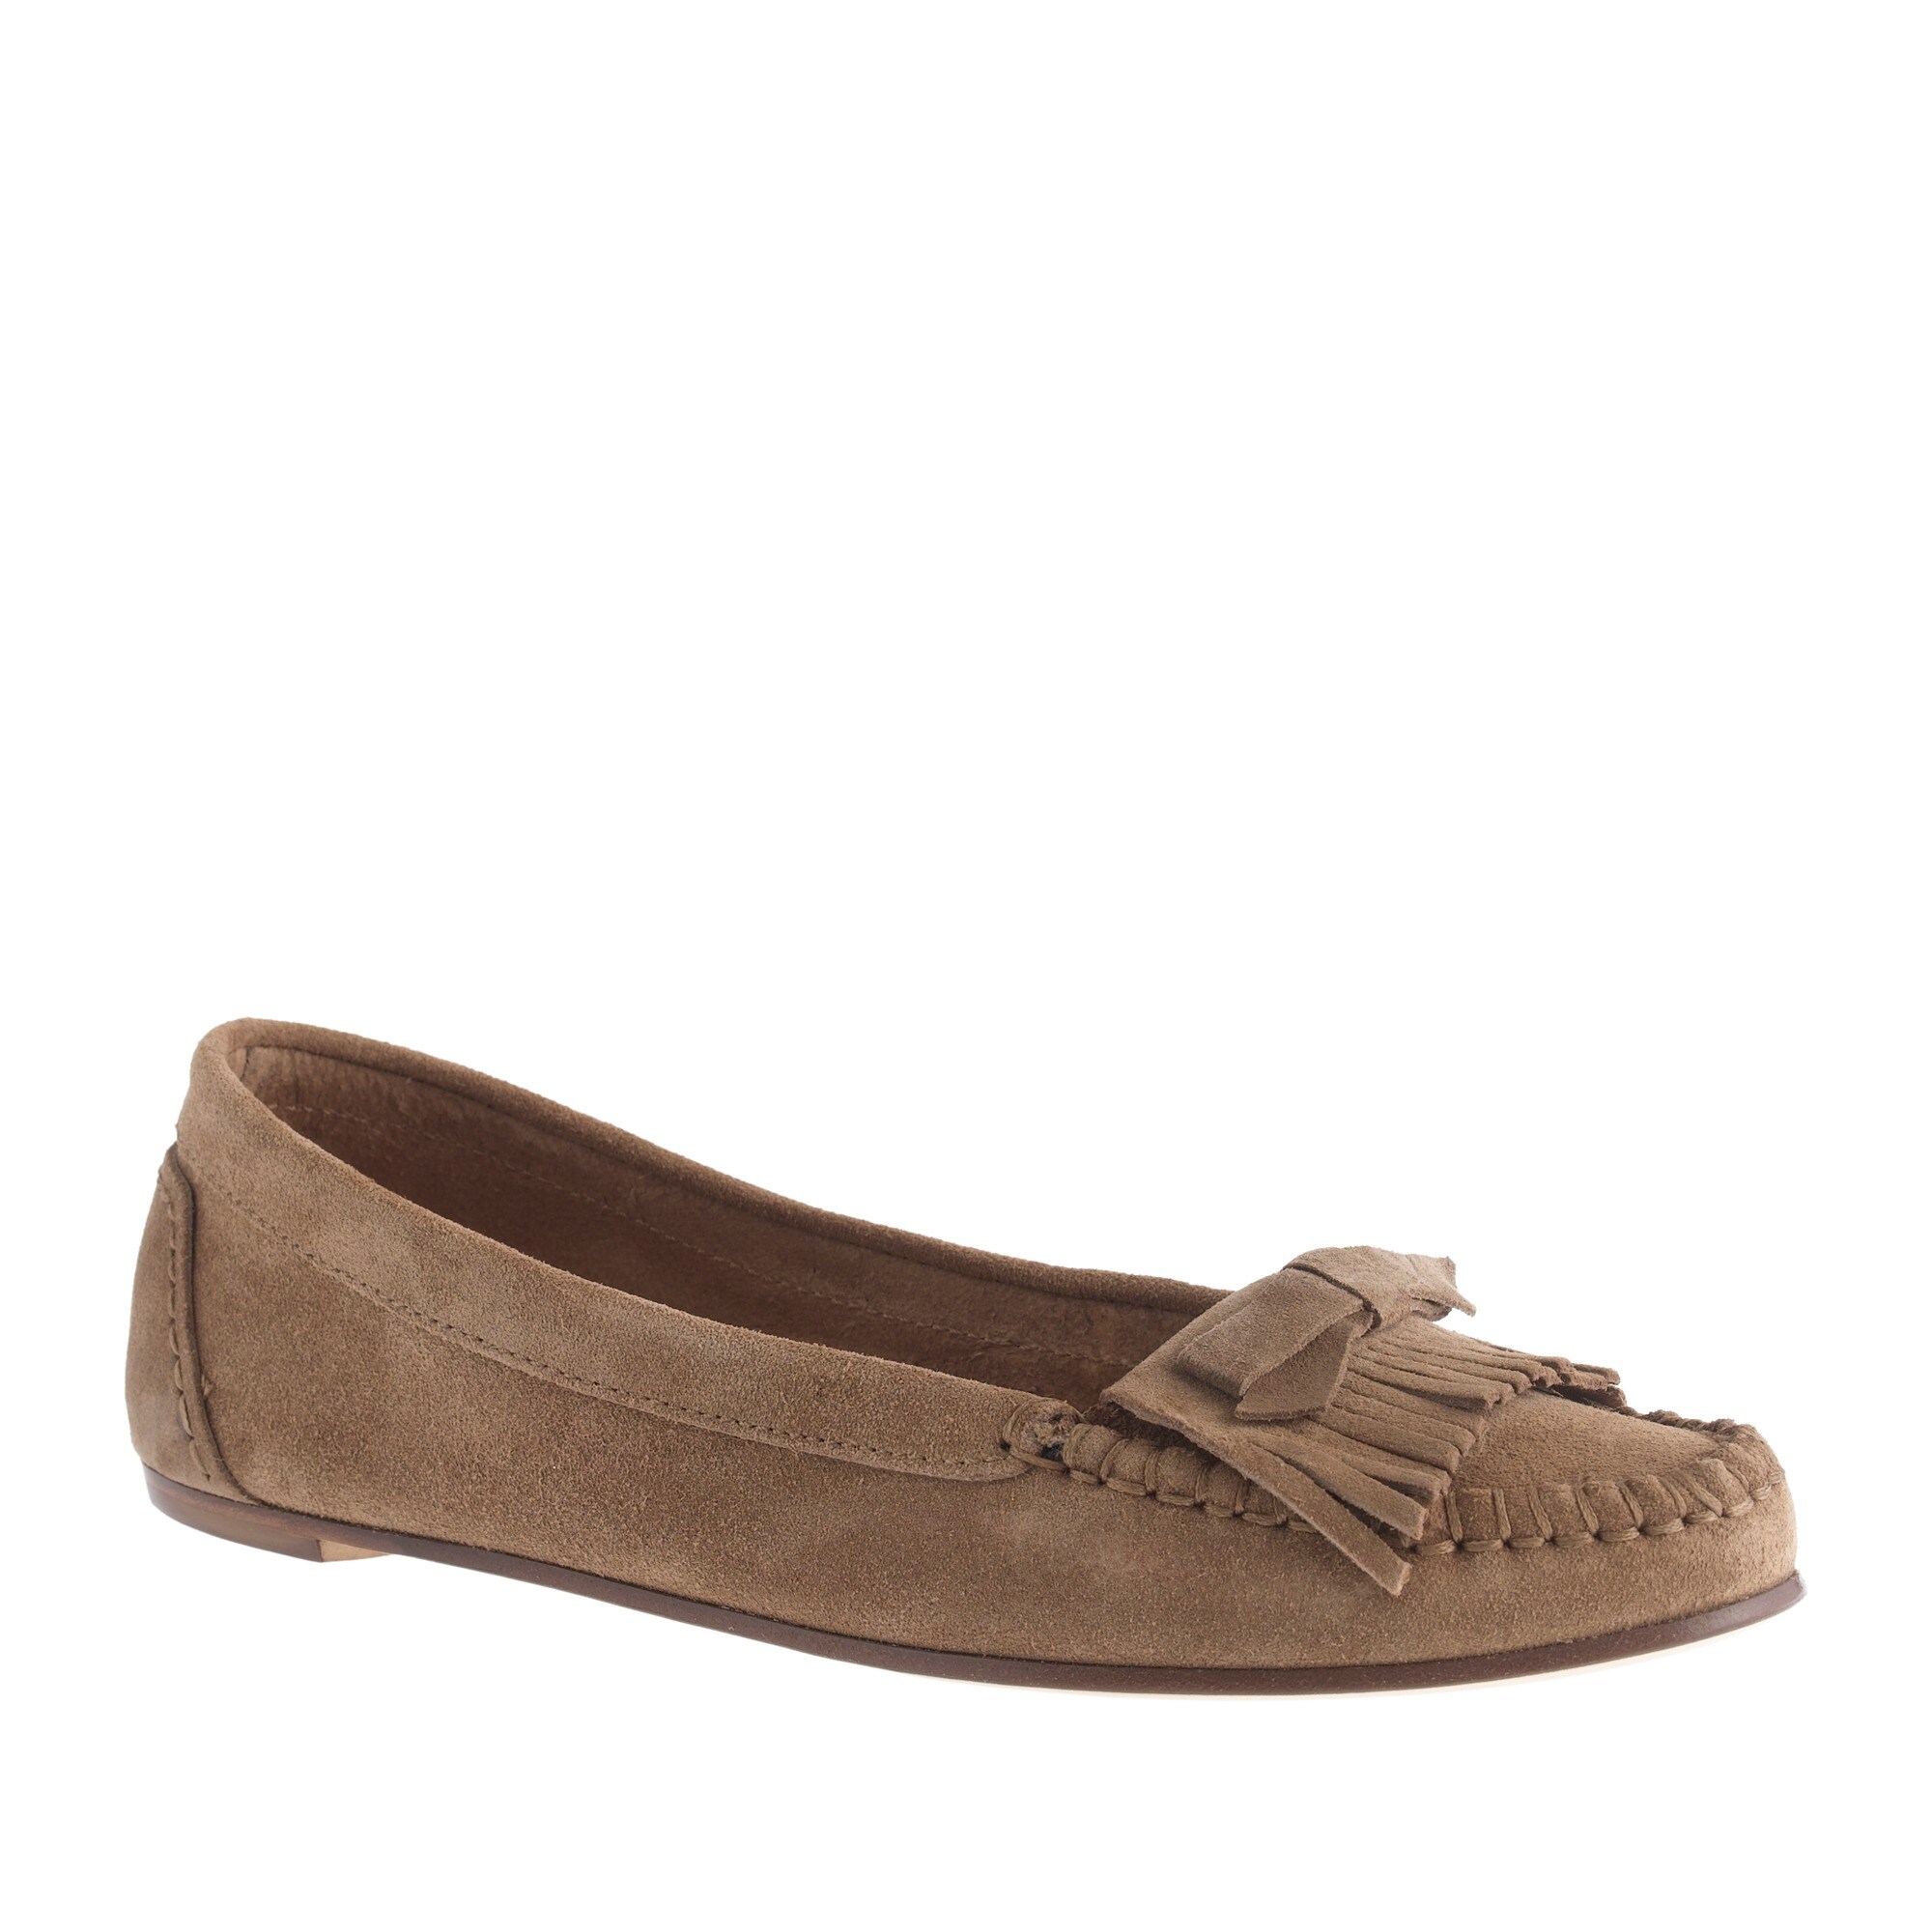 Suede bow moccasins : Women loafers & oxfords | J.Crew